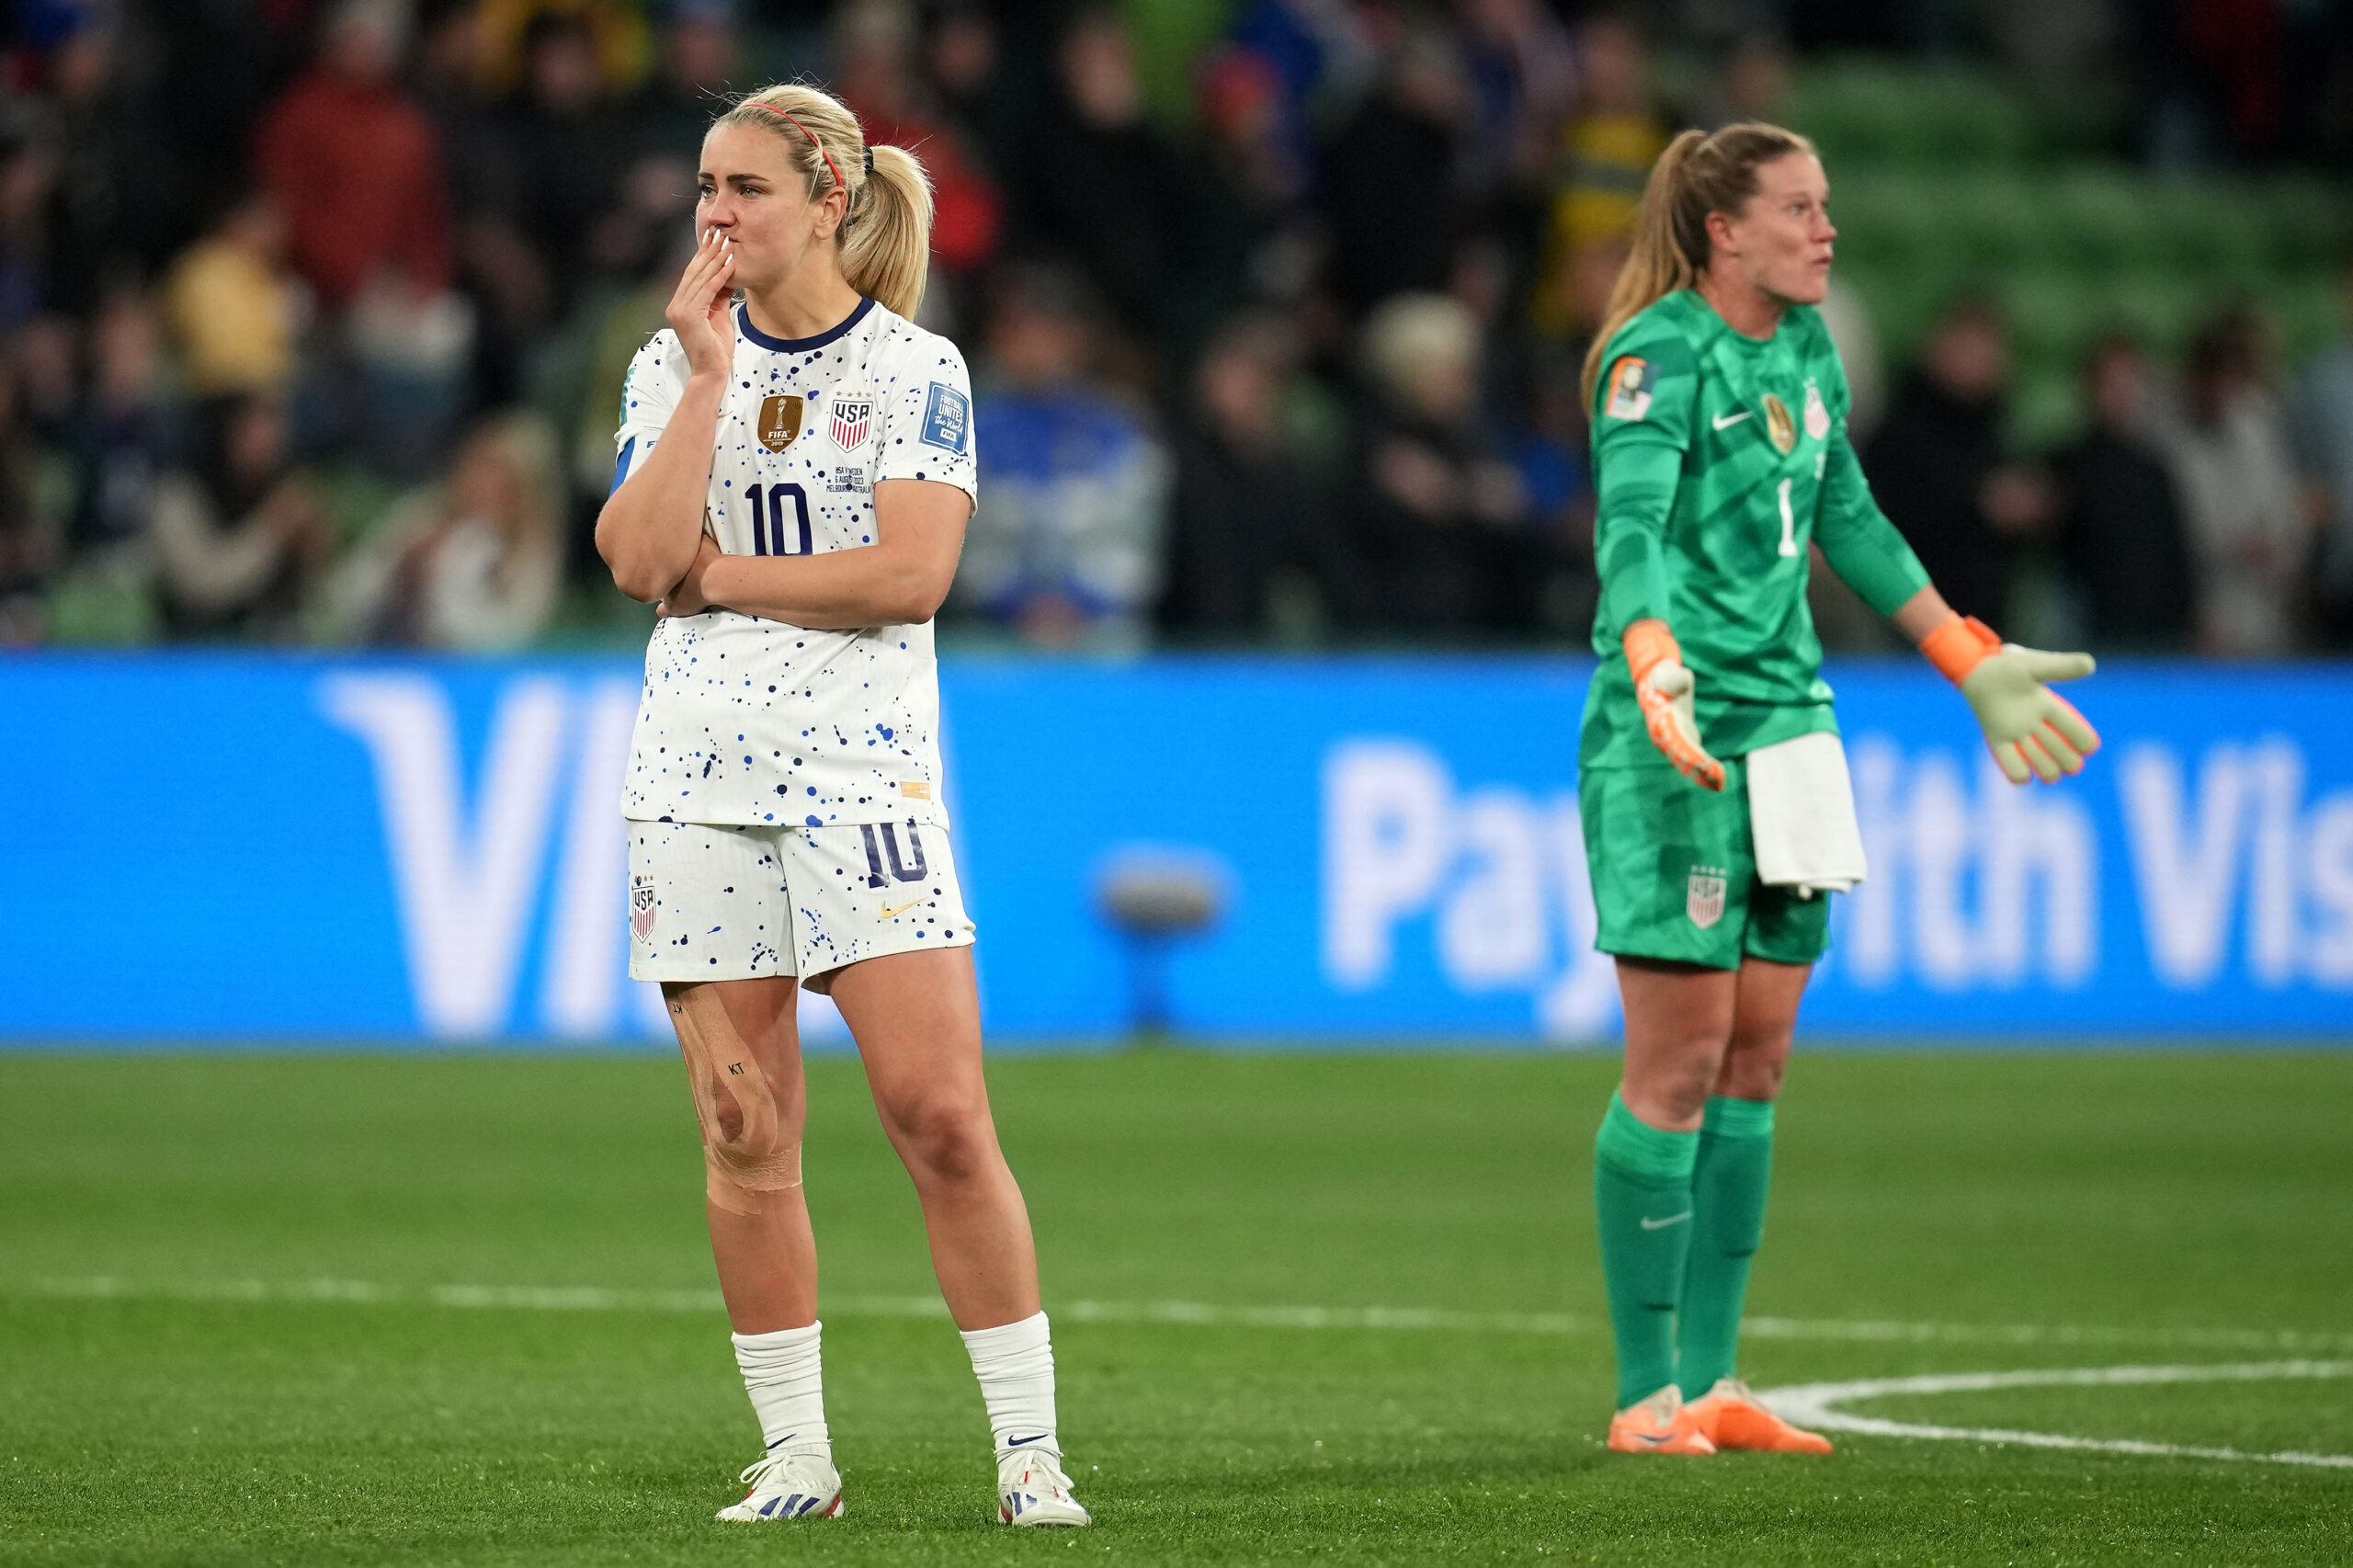 Us Knocked Out Of Womens World Cup After Heartbreaking Penalty Shootout 5430